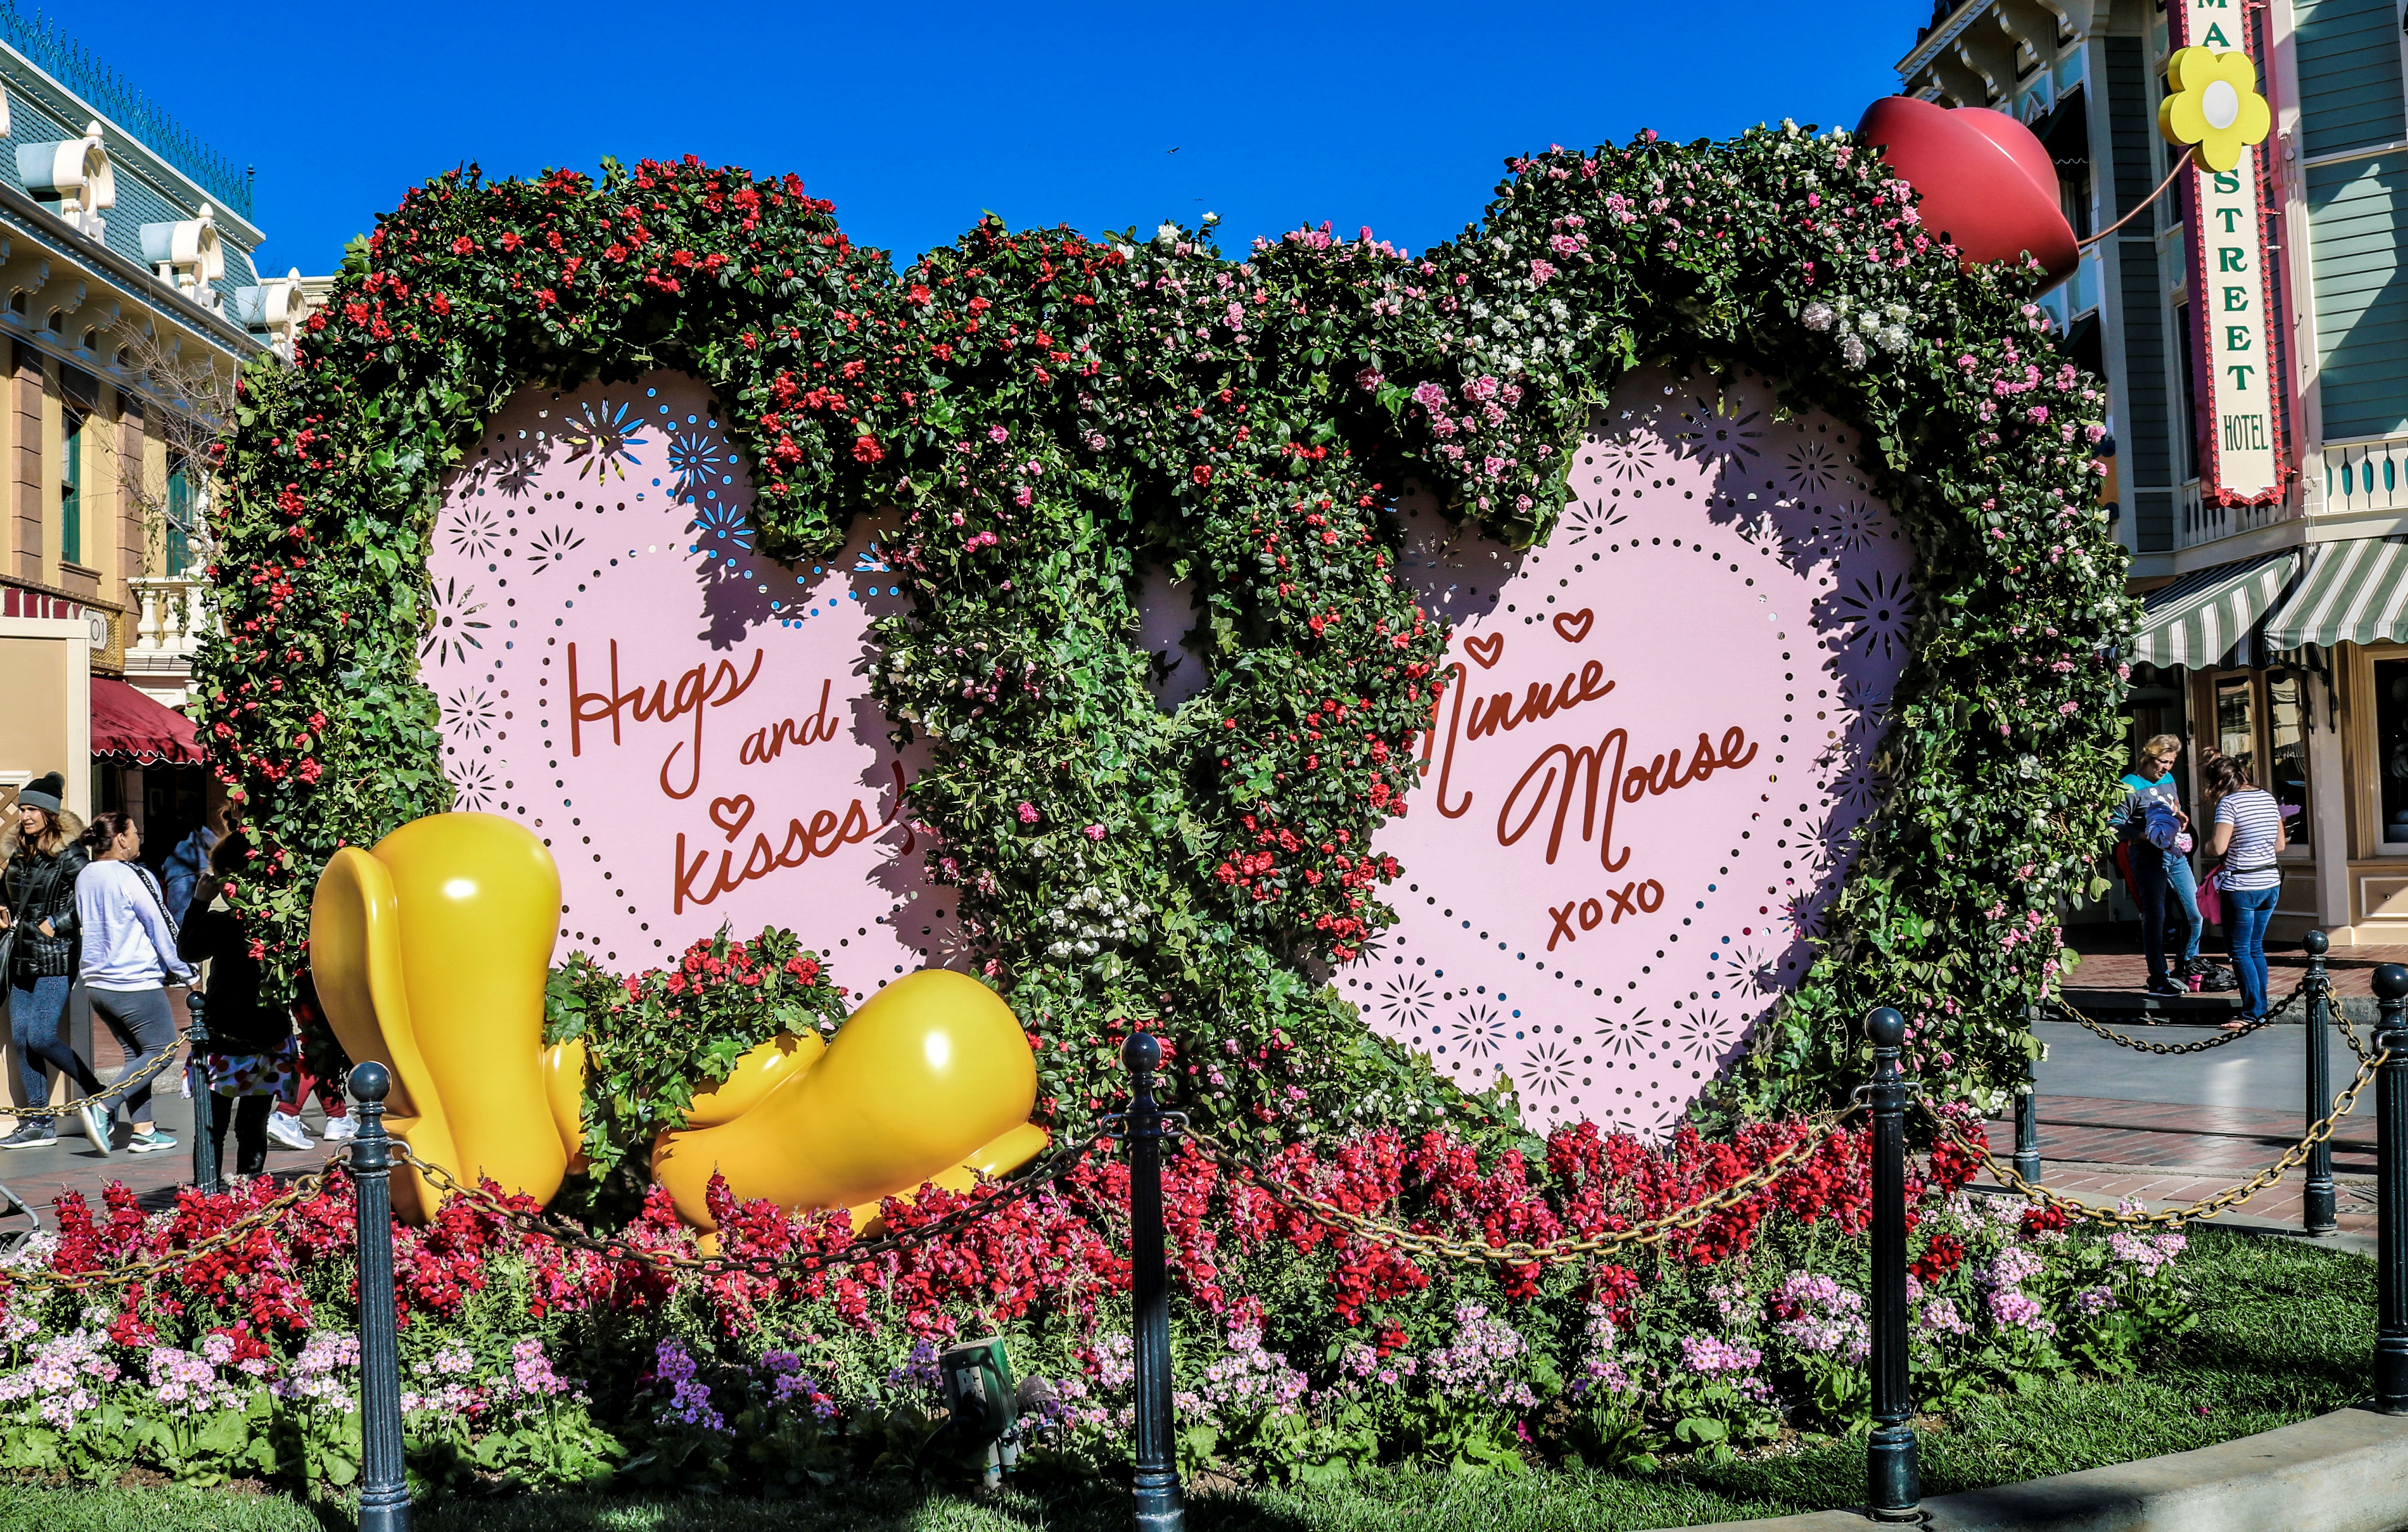 Snap a lovely photo with this adorable photo op right on Main Street! 